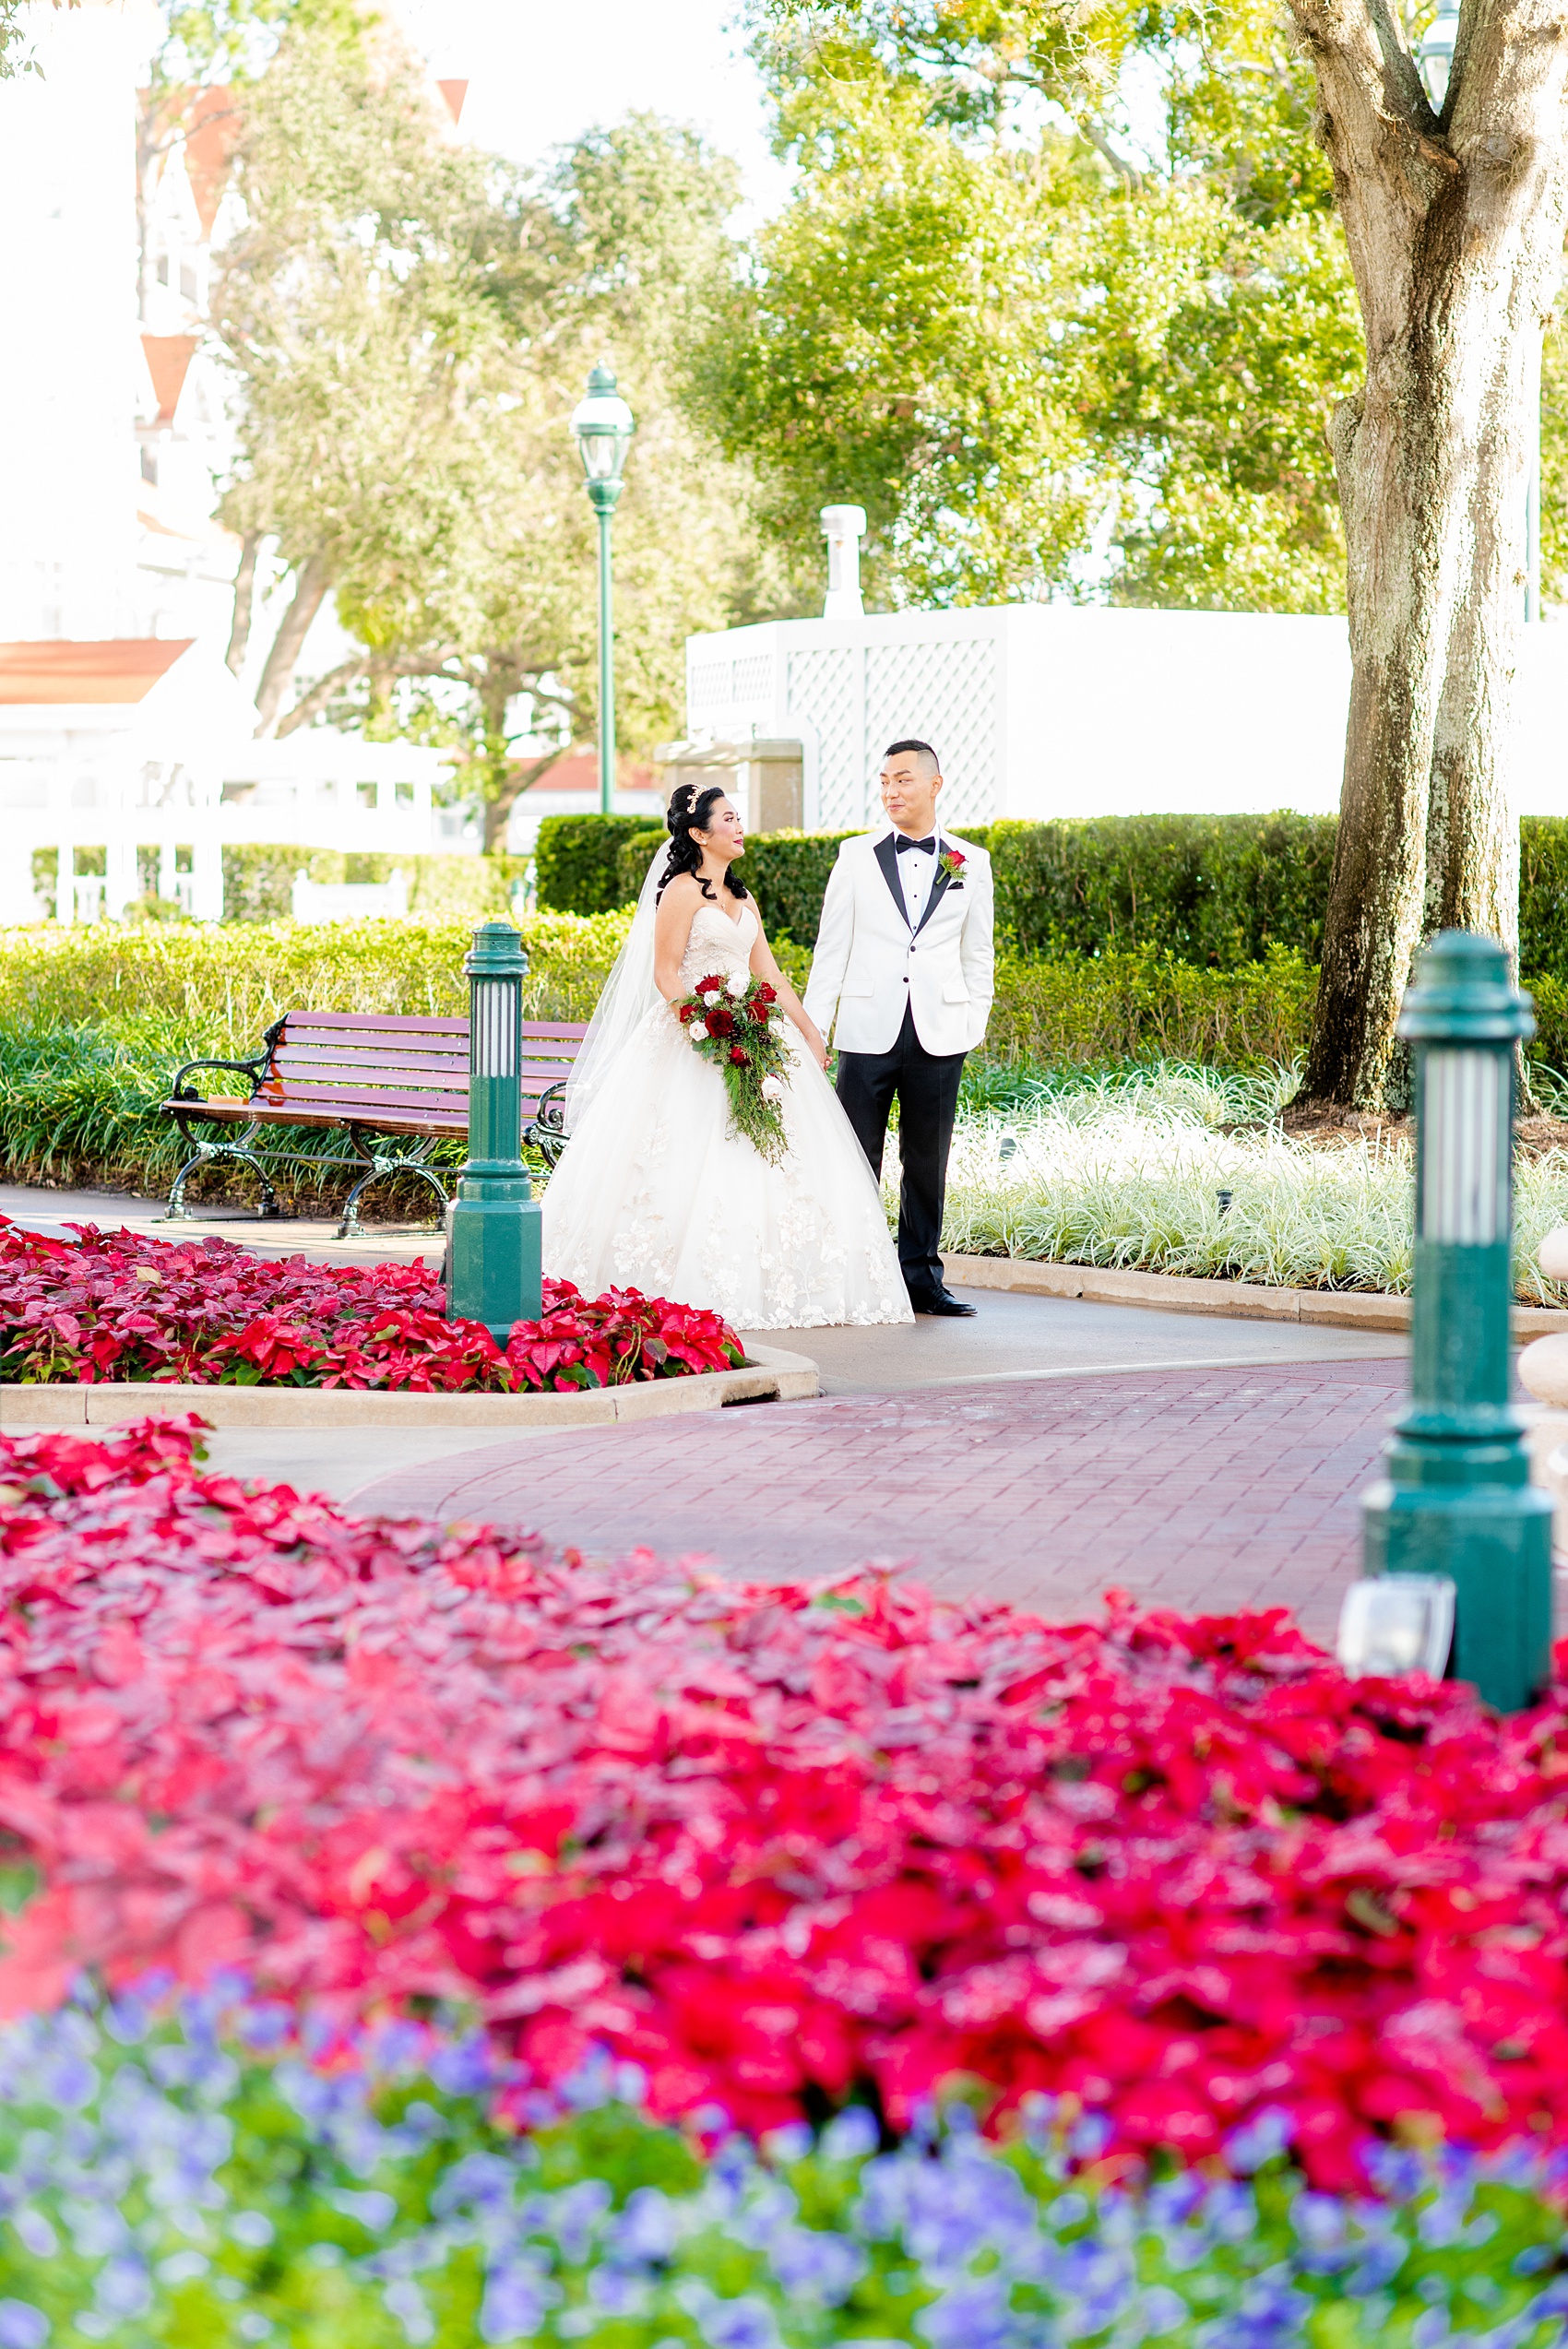 Walt Disney World photographs by Mikkel Paige Photography. The bride and groom had December pictures at the Grand Floridian Resort, Wedding Pavilion and Contemporary Hotel. It had a Beauty and the Beast theme and the bride wore a beautiful rose embroidered dress, befitting of a princess. Her red rose bouquet had holiday greenery and a cascading effect. The groom wore a white tuxedo. #disneywedding #disneybride #waltdisneyworld #DisneyWorldWedding #cascadingbouquet